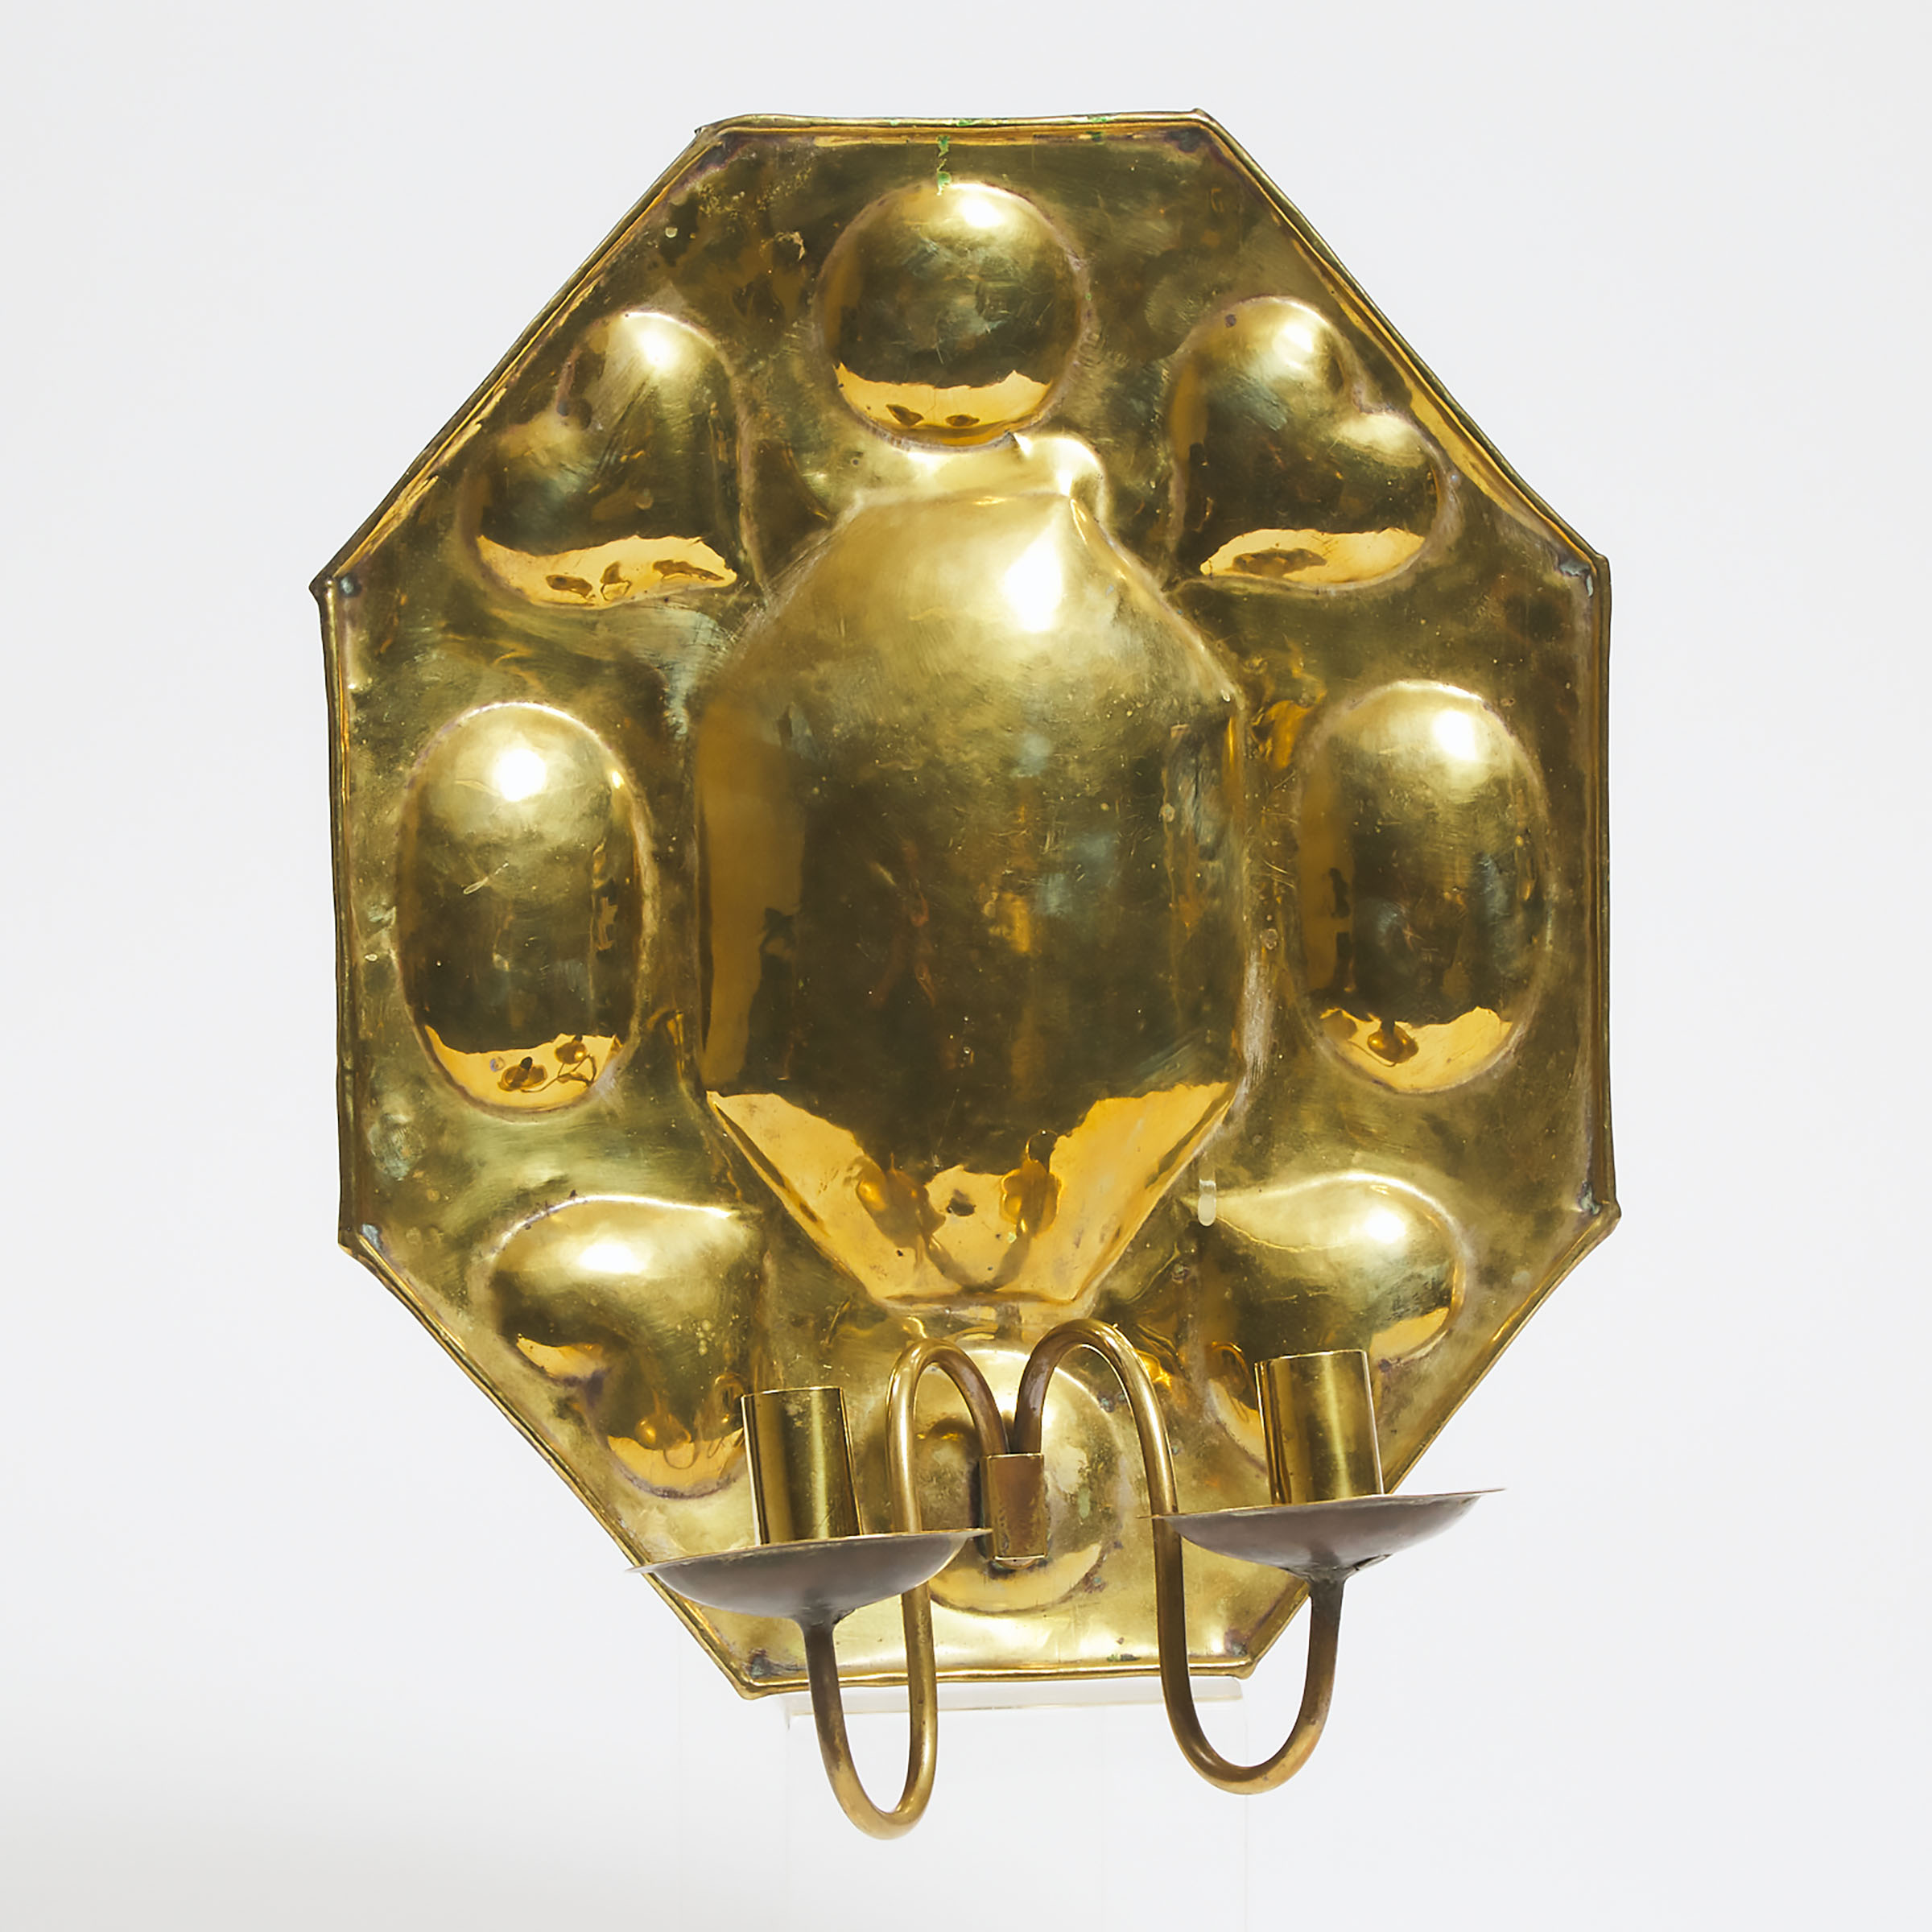 Dutch Brass Repousée Two Light Wall Sconce, mid 18th century